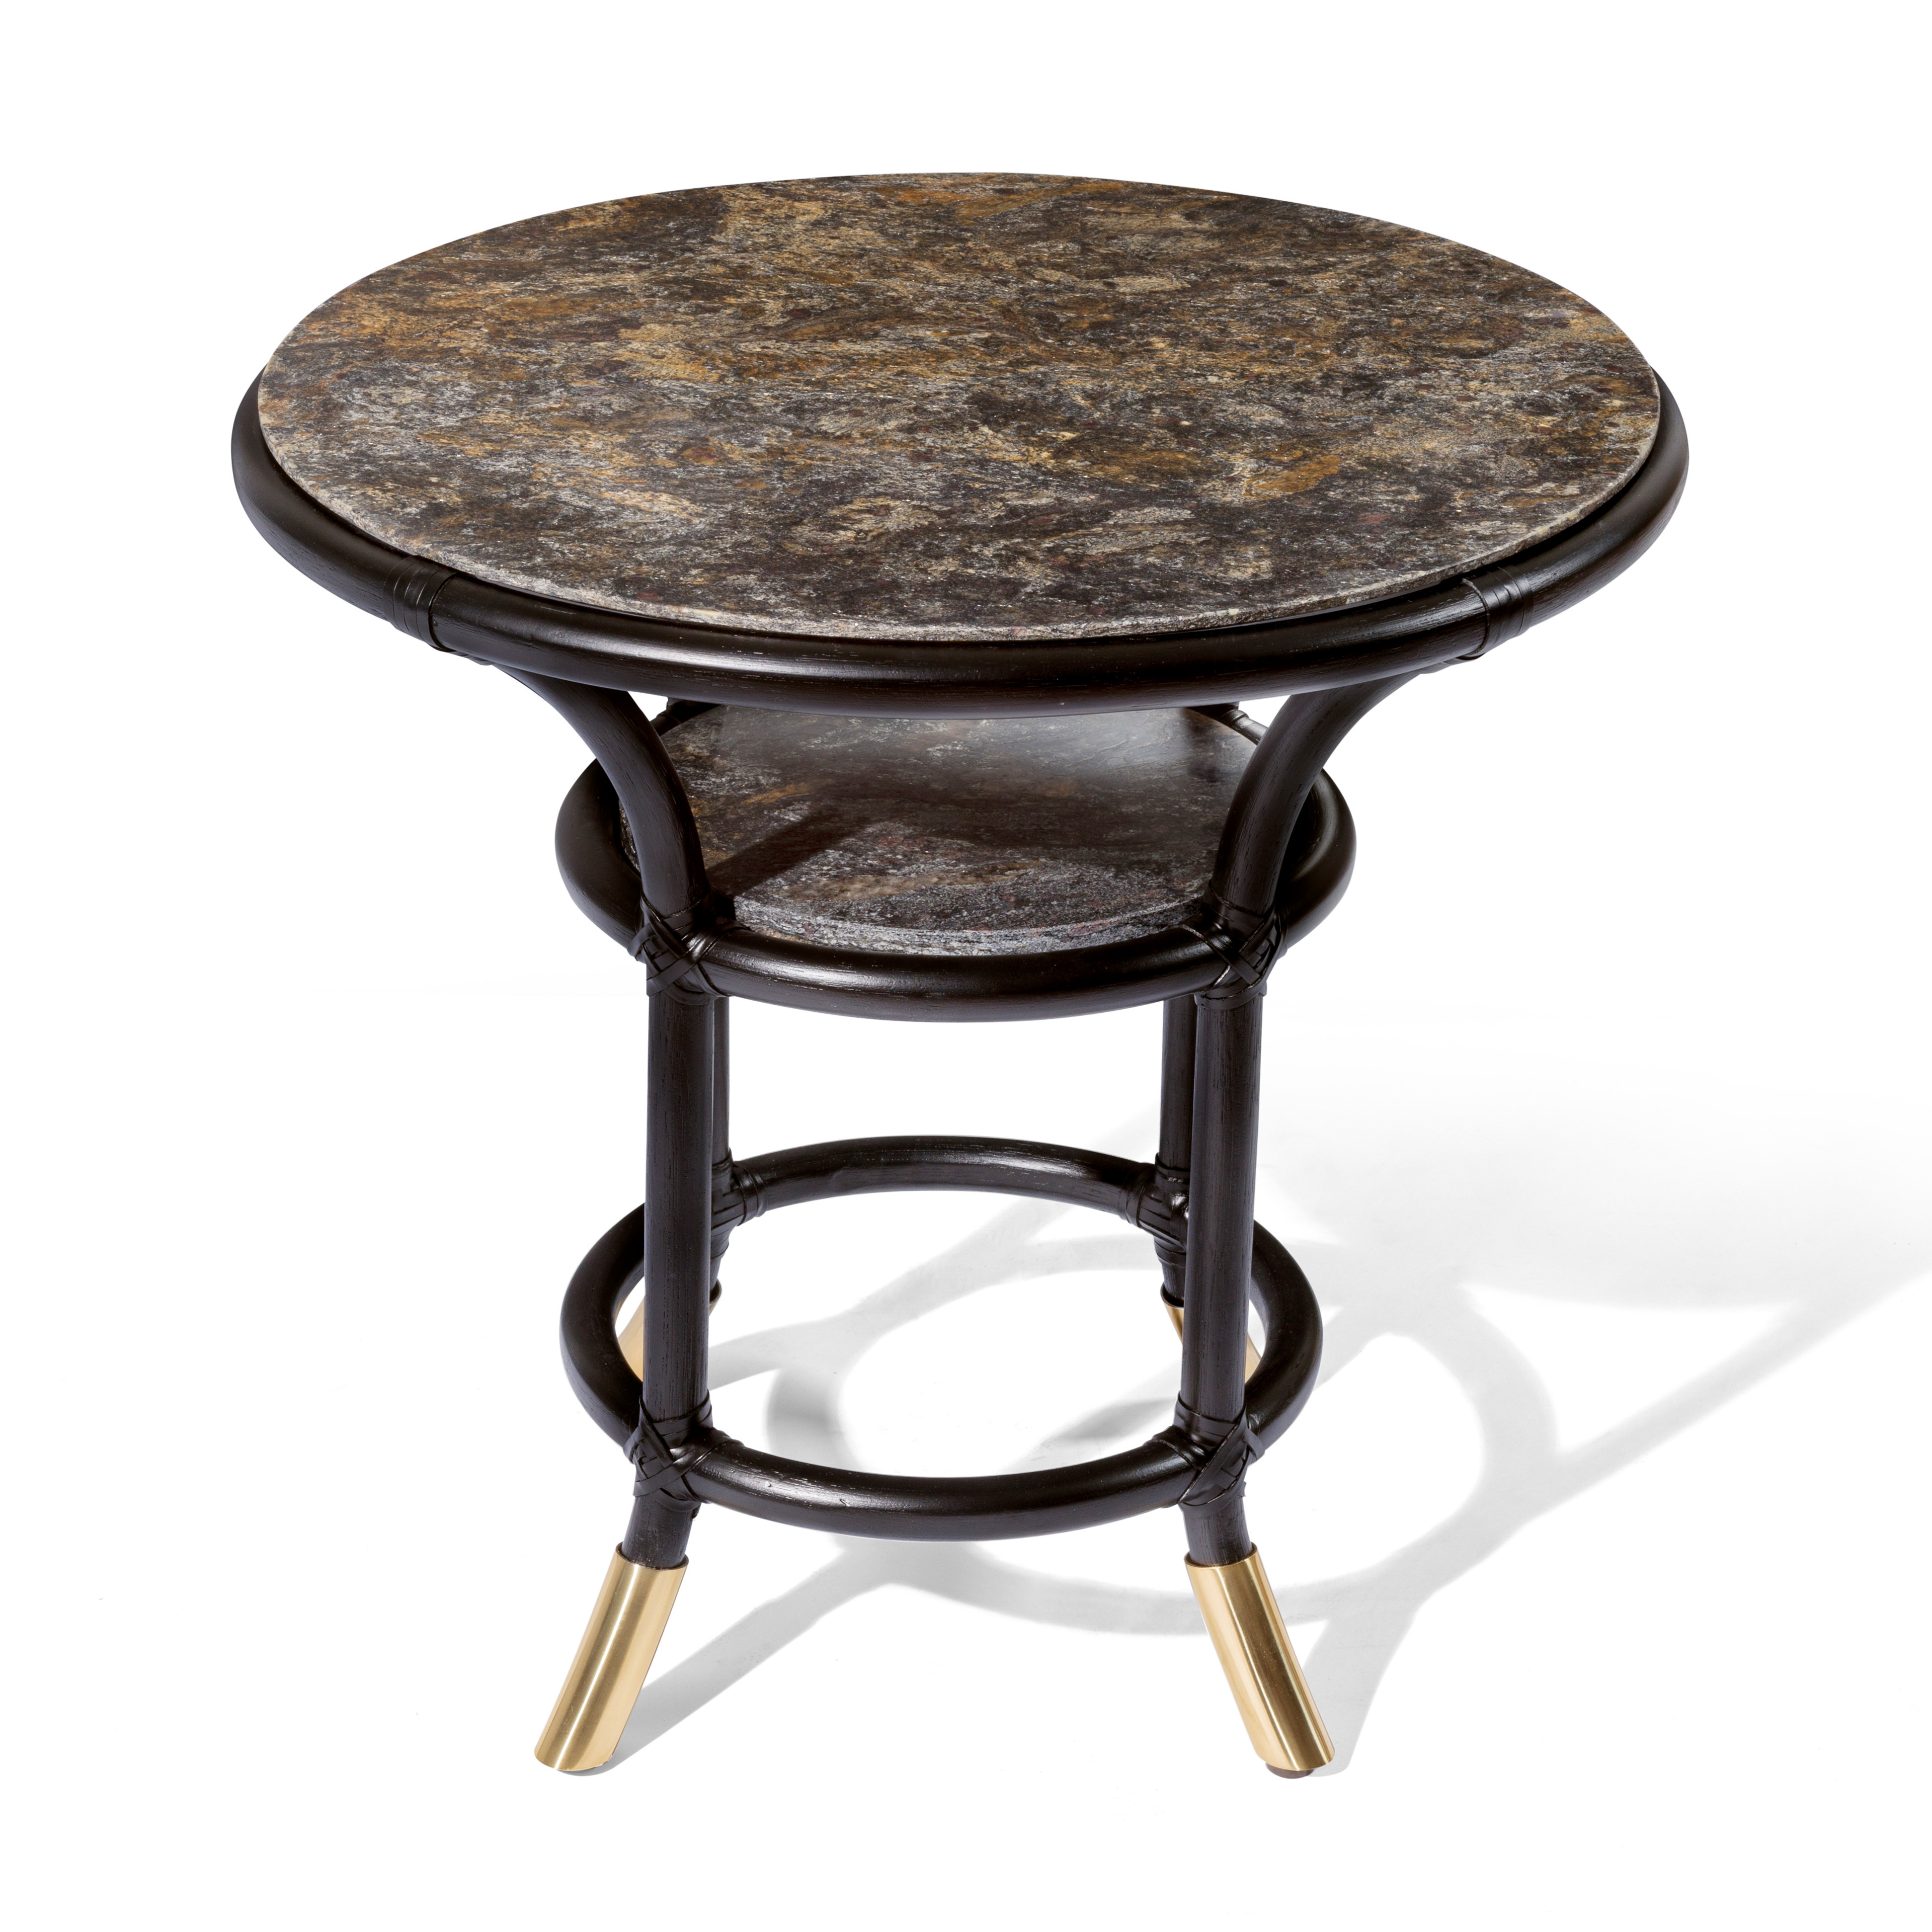 Farnese Low table | Visionnaire Home Philosophy Academy